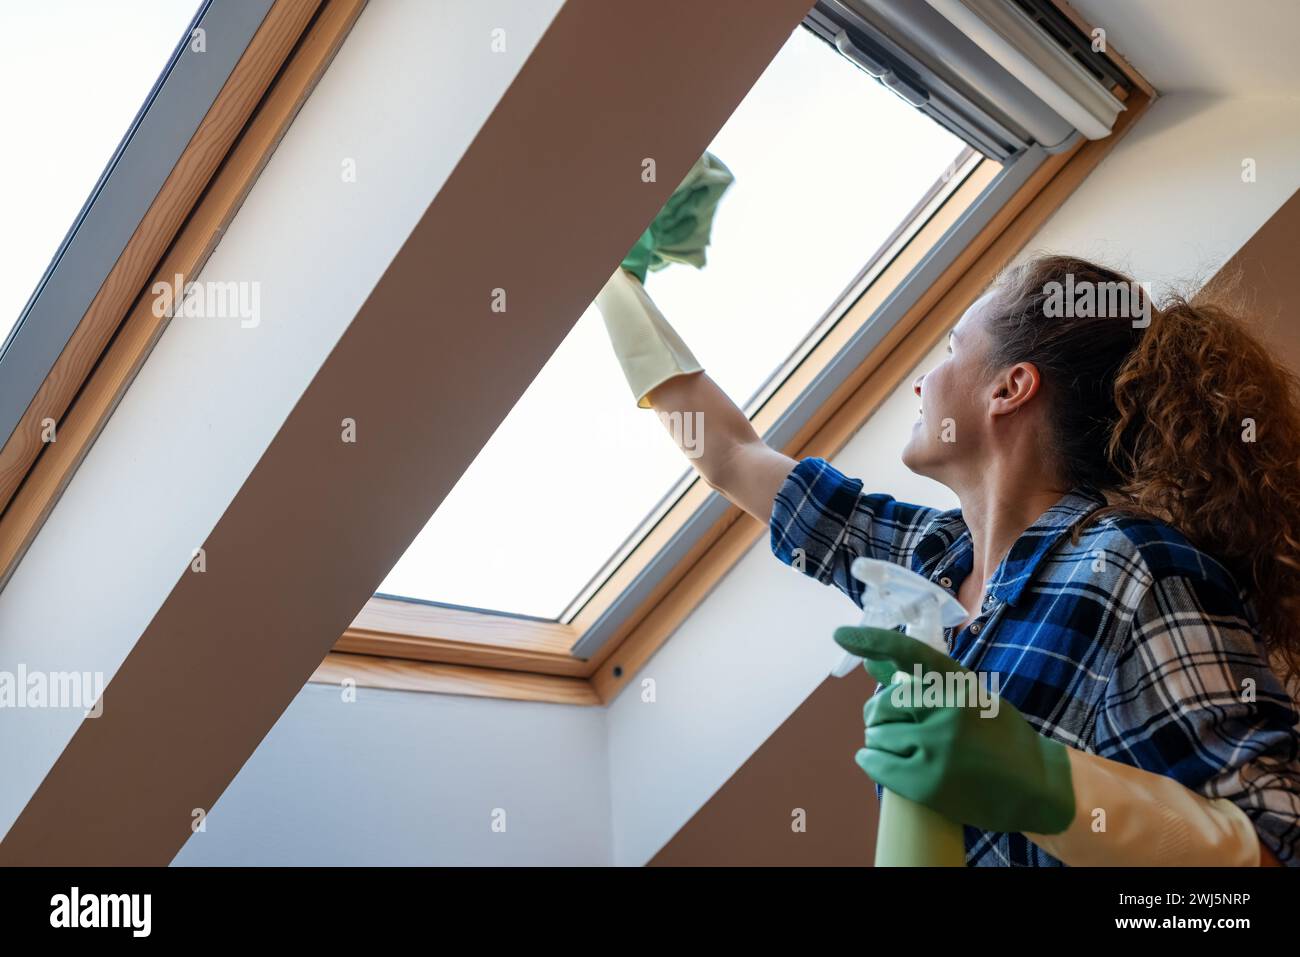 Woman washes skylight window at home. Housework, keeping house clean and tidy. Stock Photo